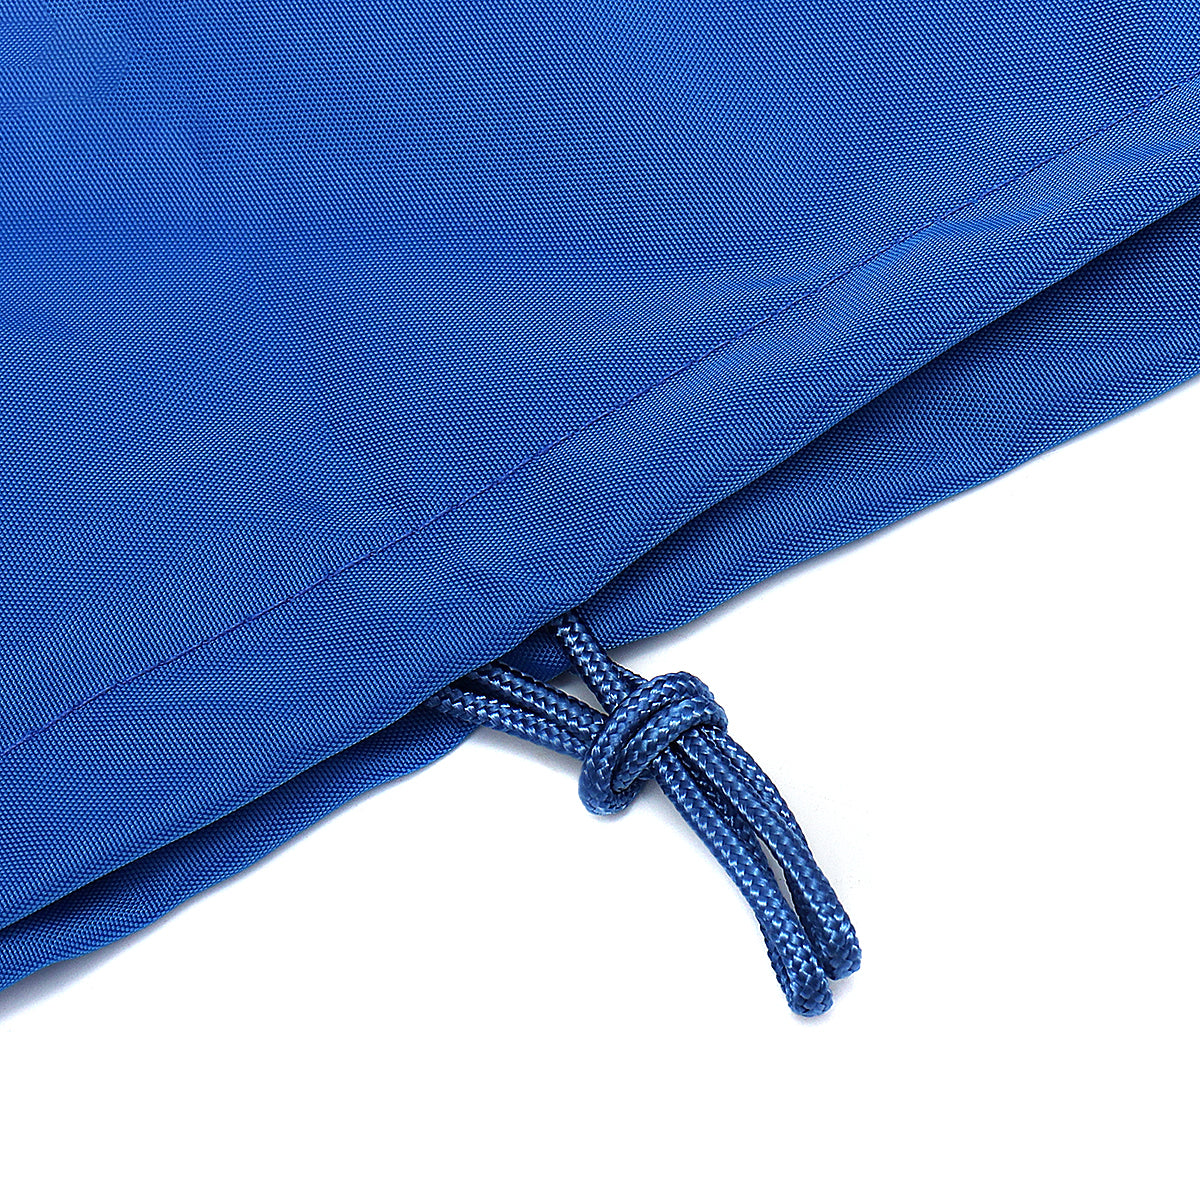 Midnight Blue Boat Seat Cover Elastic Rope Drawstring Furniture Dust Outdoor Yacht Waterproof Protection Blue